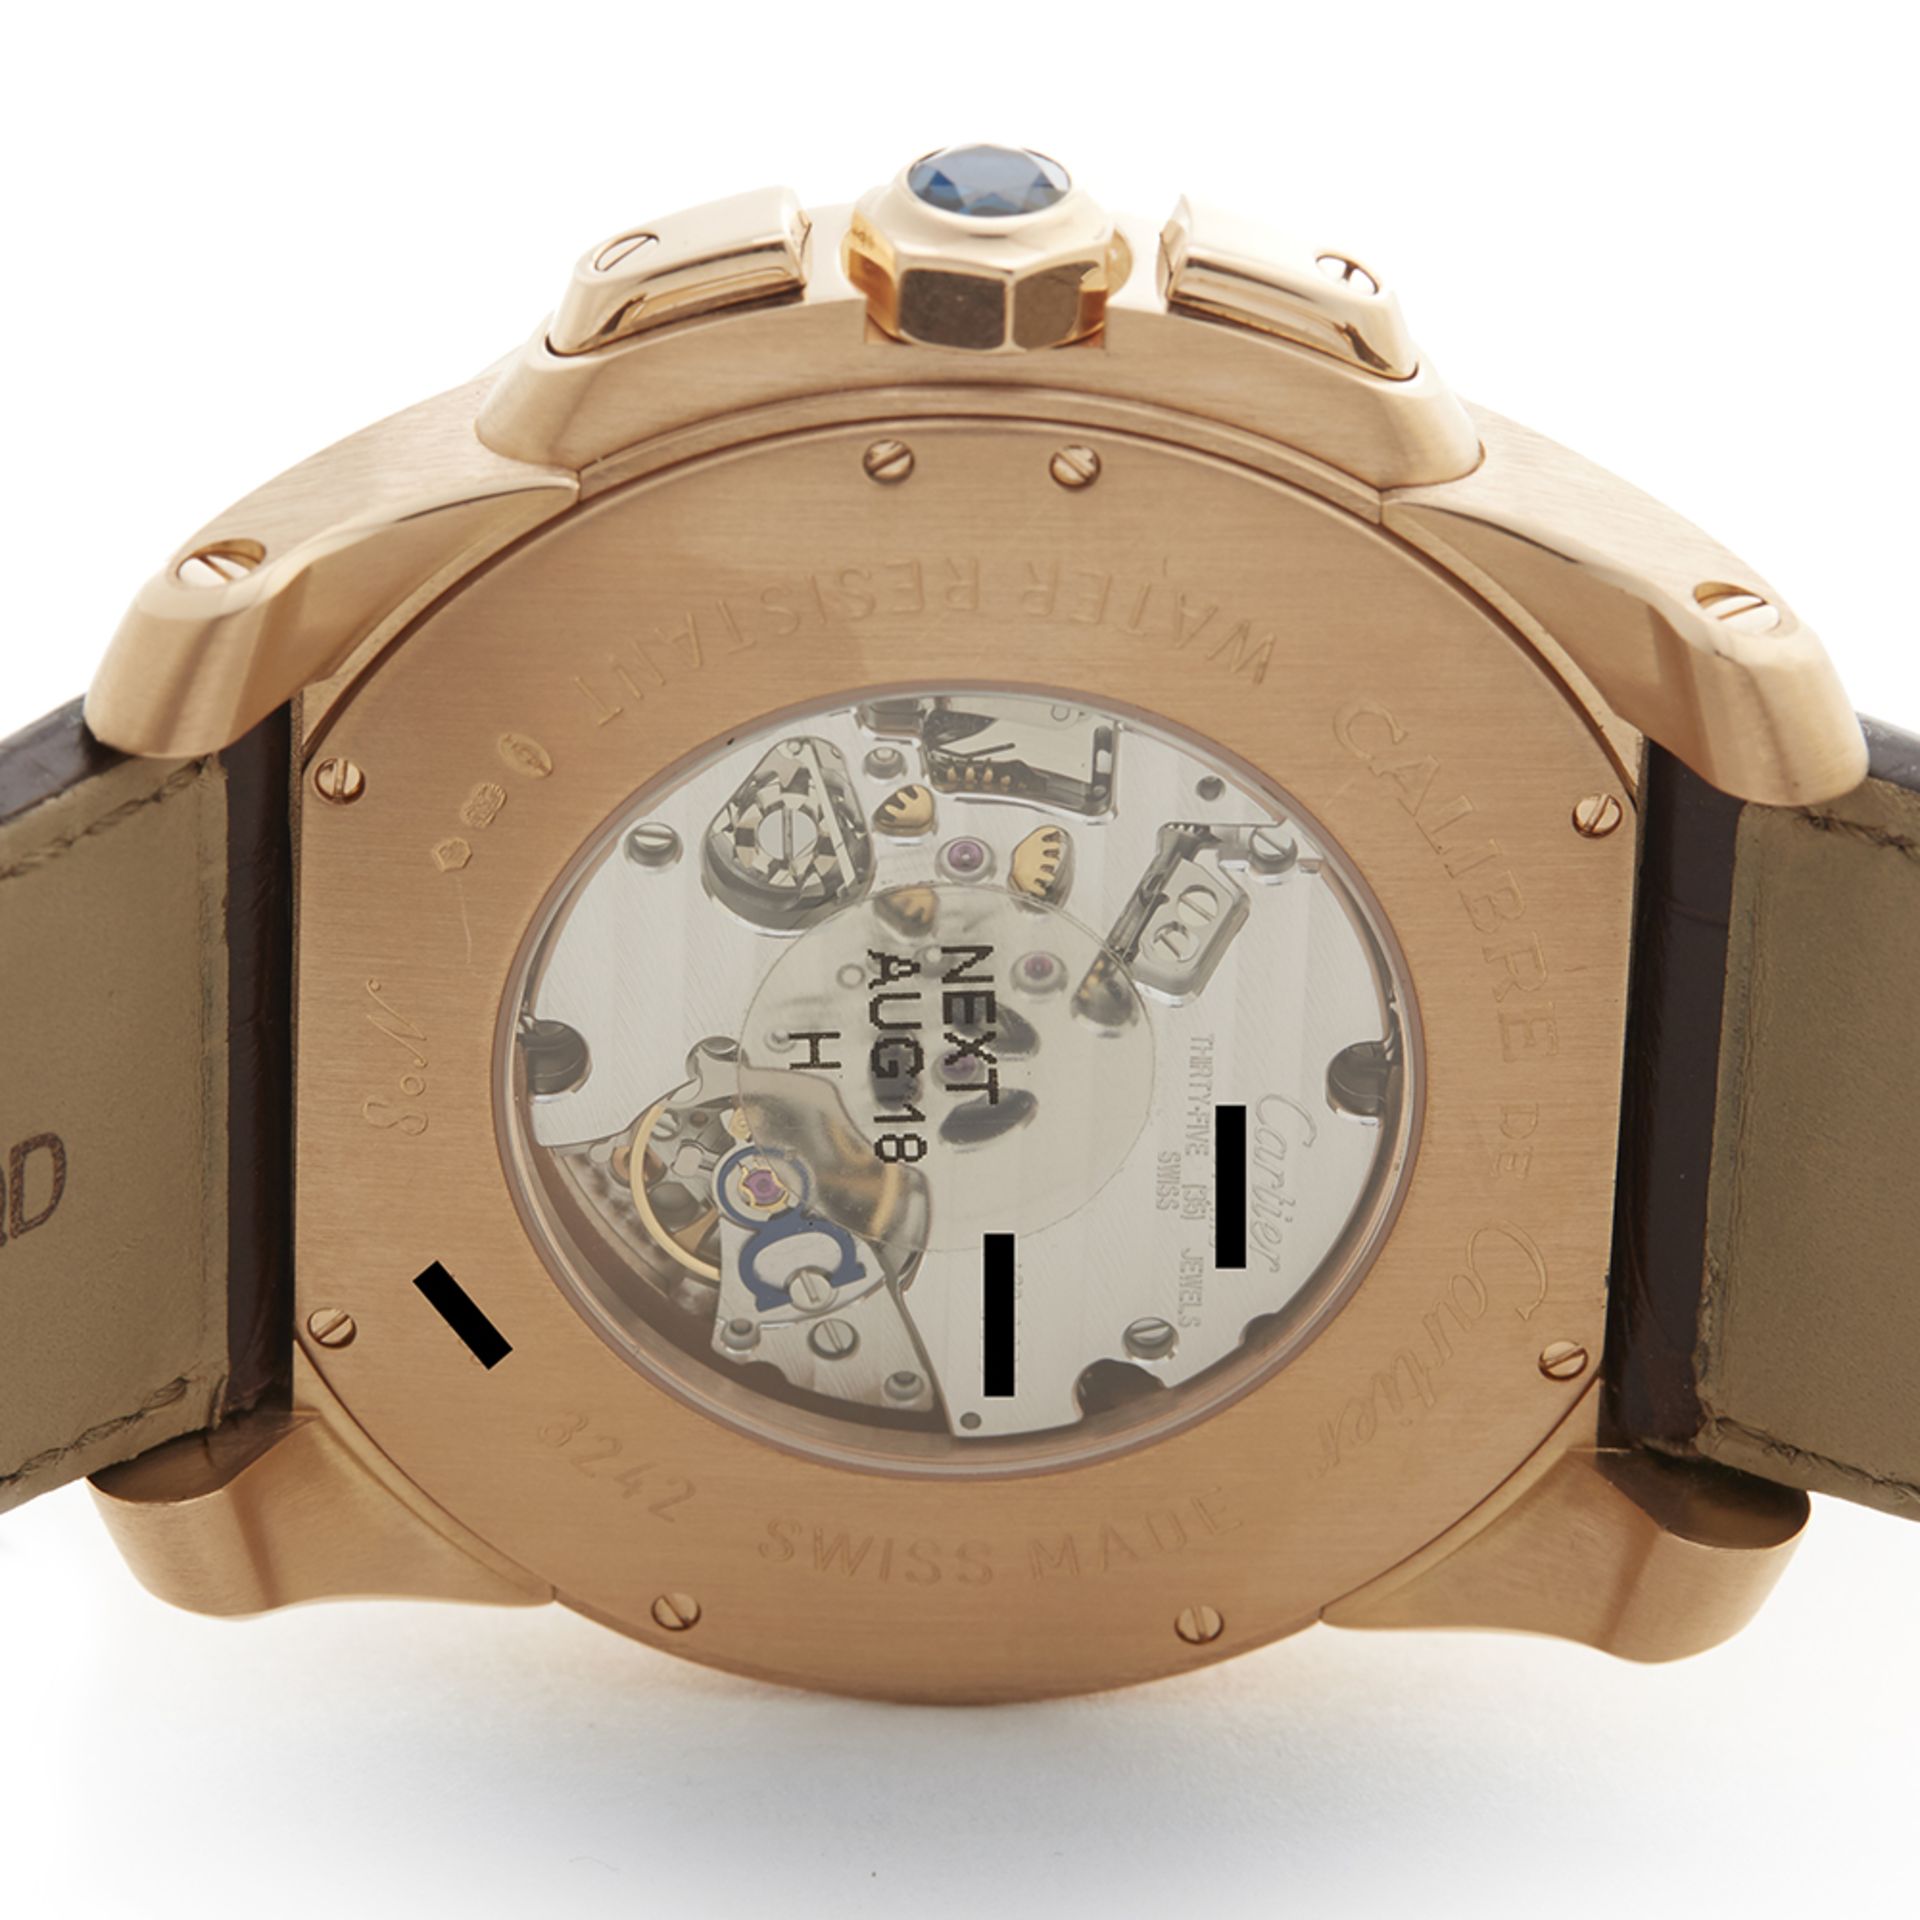 Cartier Calibre Central Chronograph 44mm 18K Rose Gold - 3242 or W7100004 - Image 8 of 9